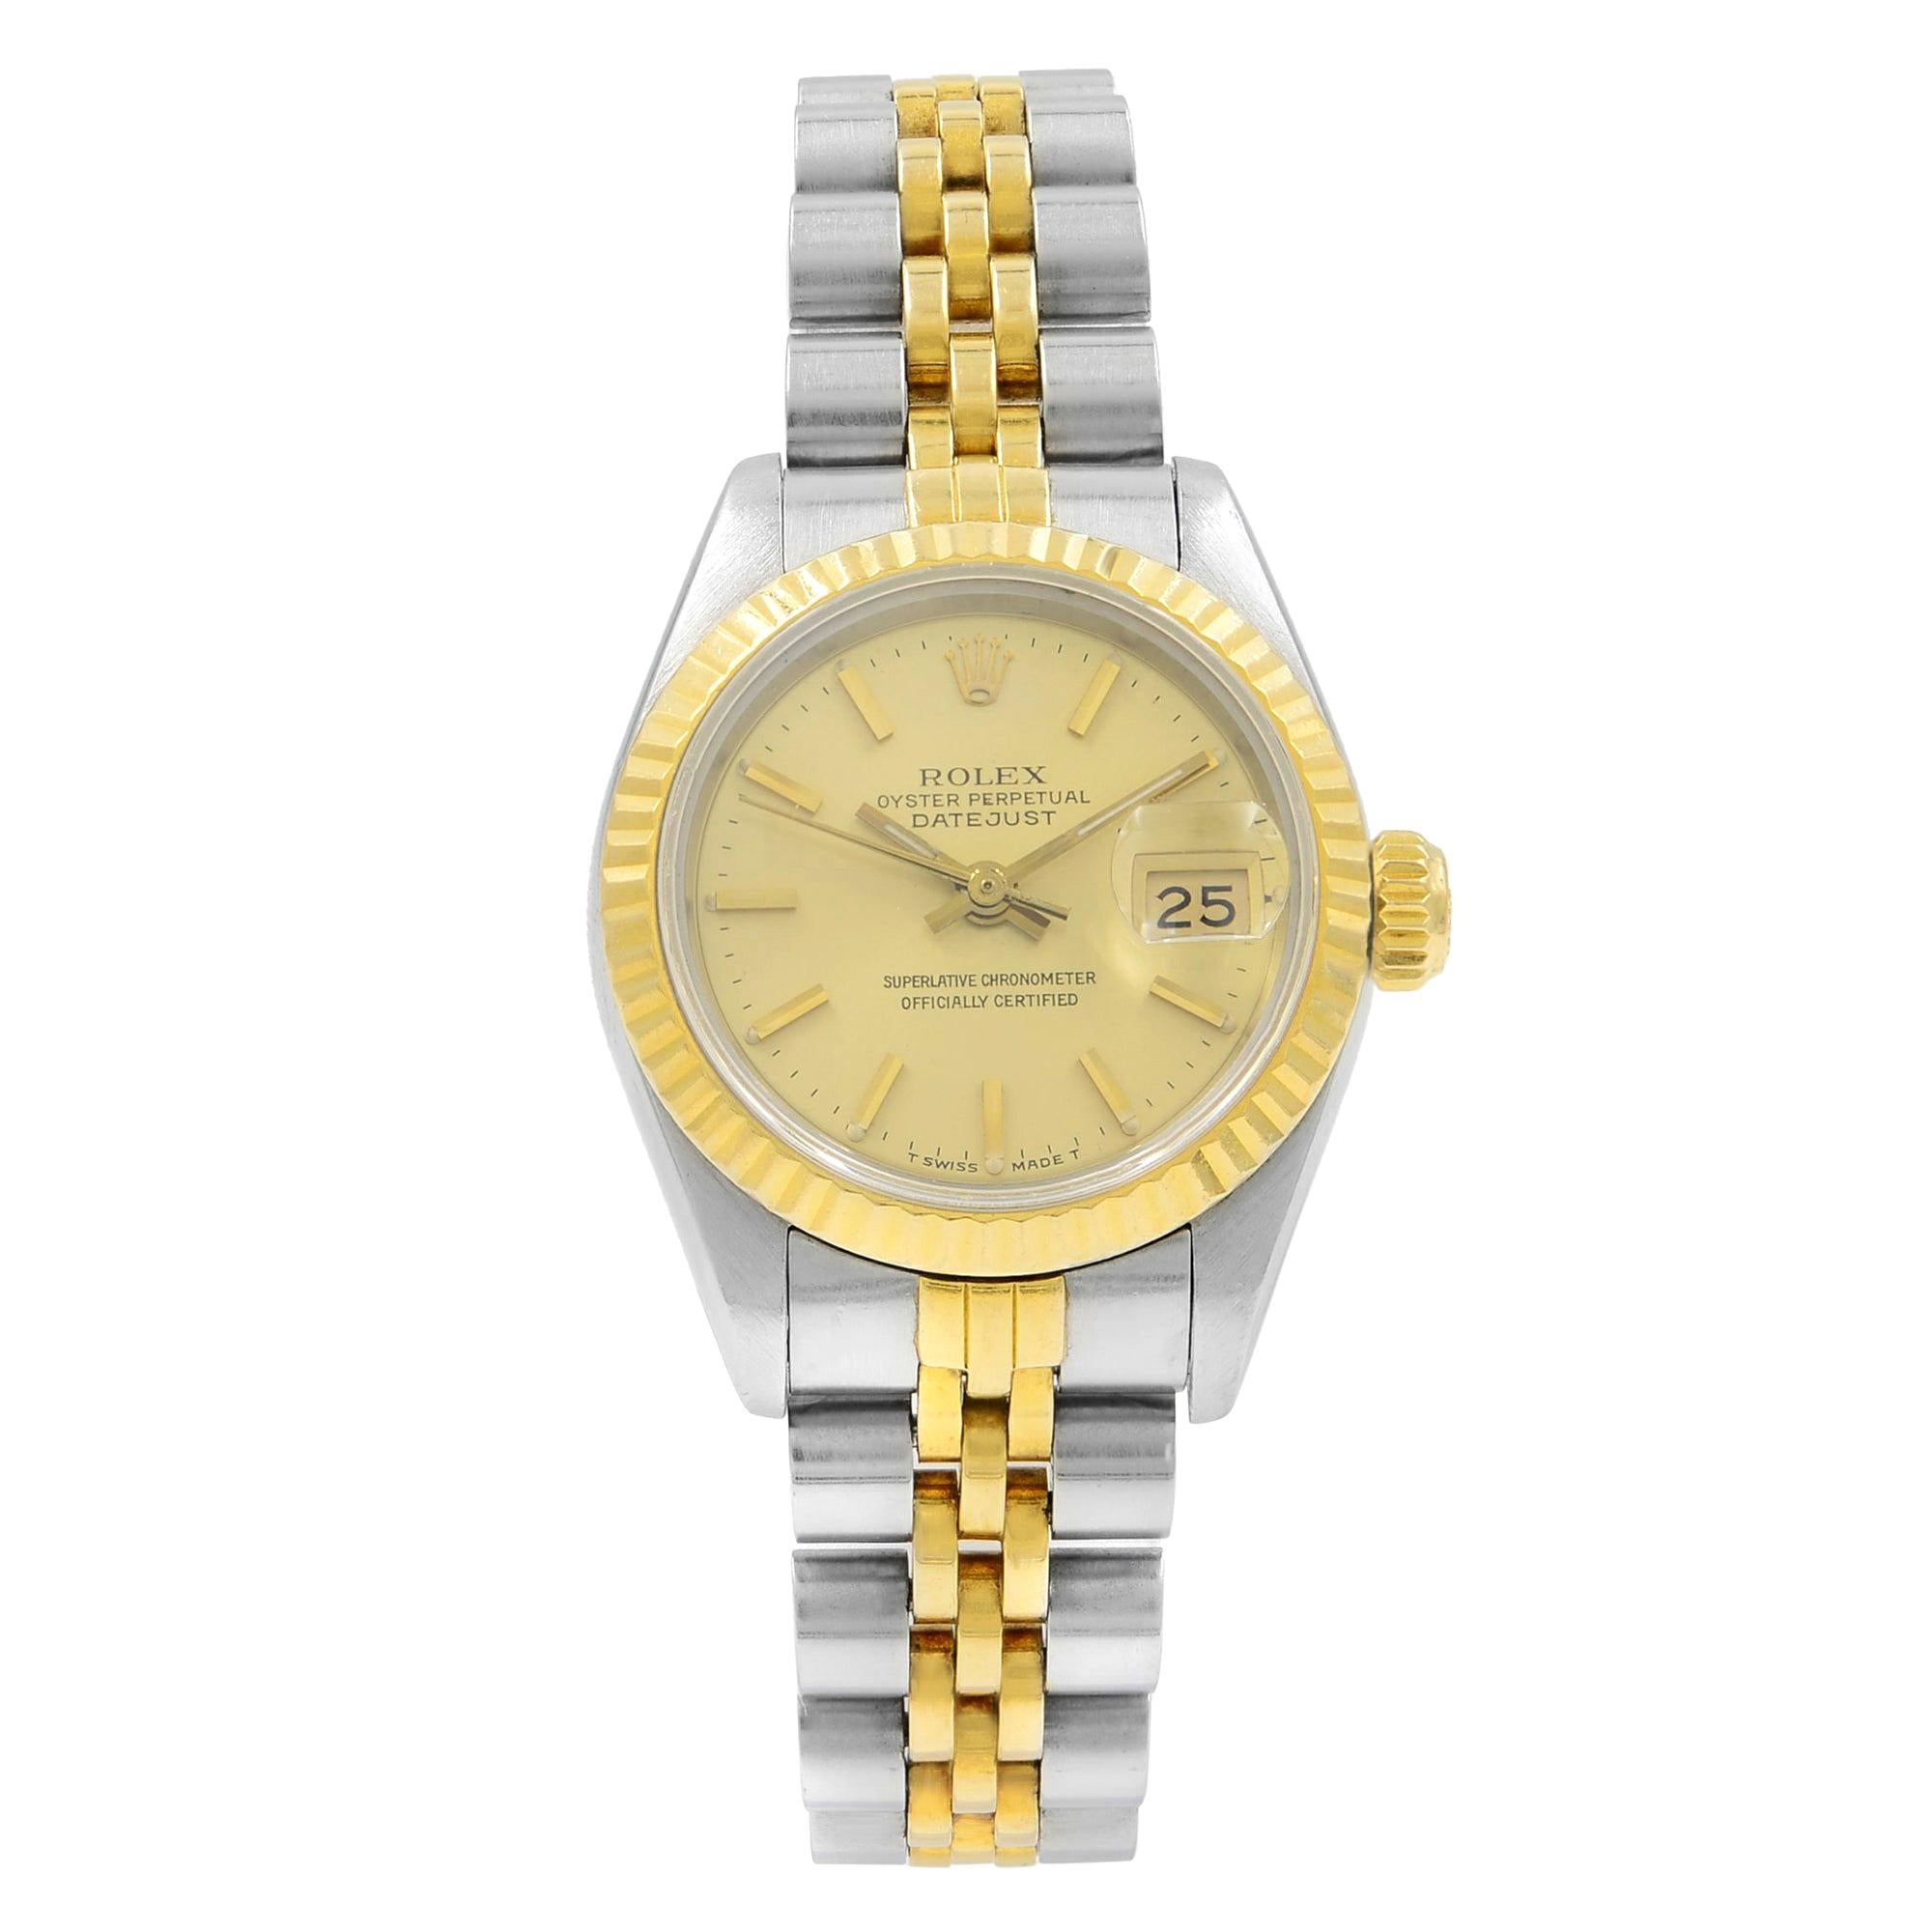 Rolex Datejust 69173 18 Karat Gold and Stainless Steel Automatic Ladies Watch